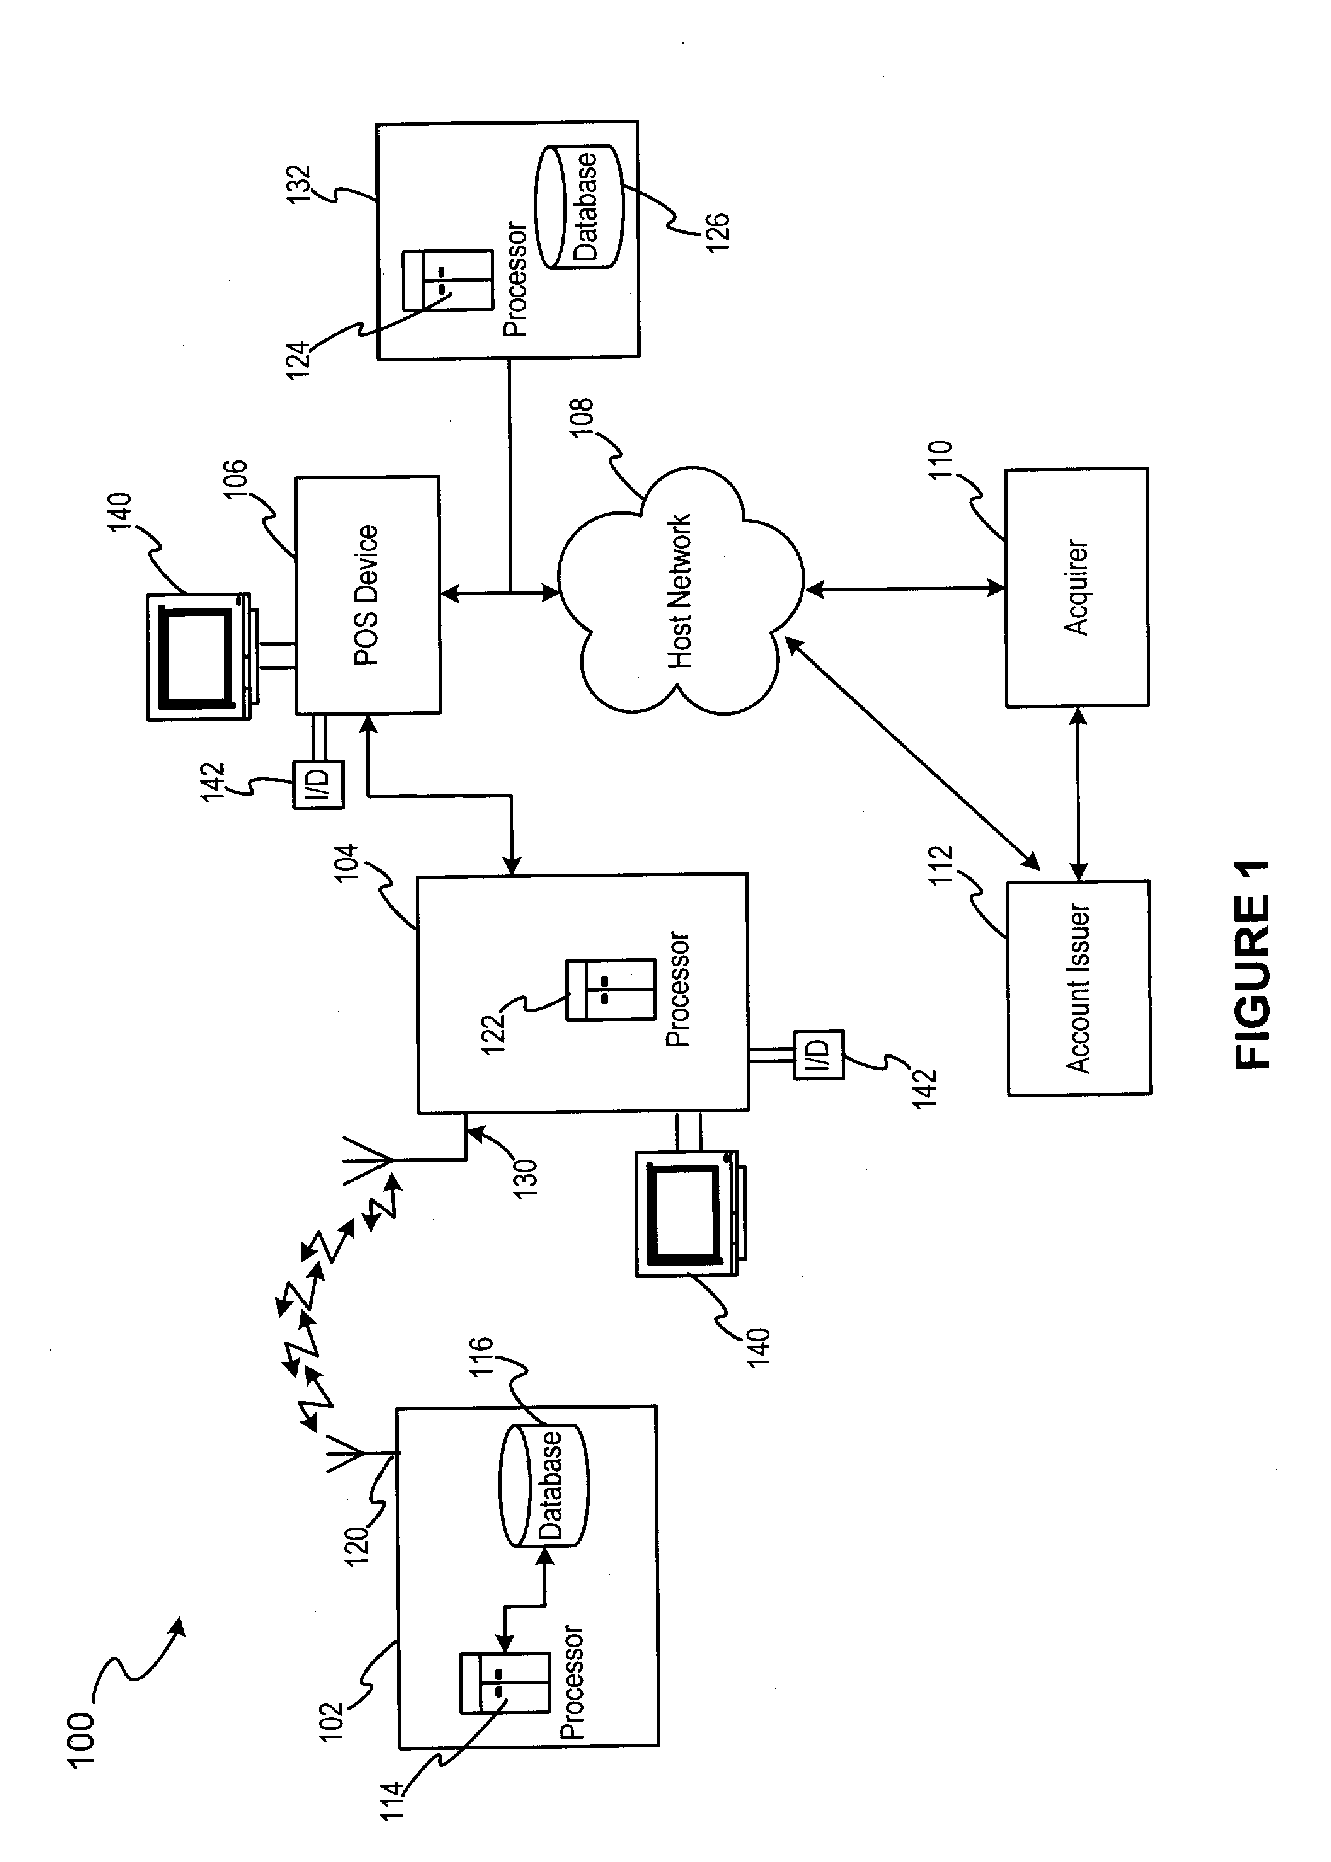 System and method for incenting RFID transaction device usage at a merchant location